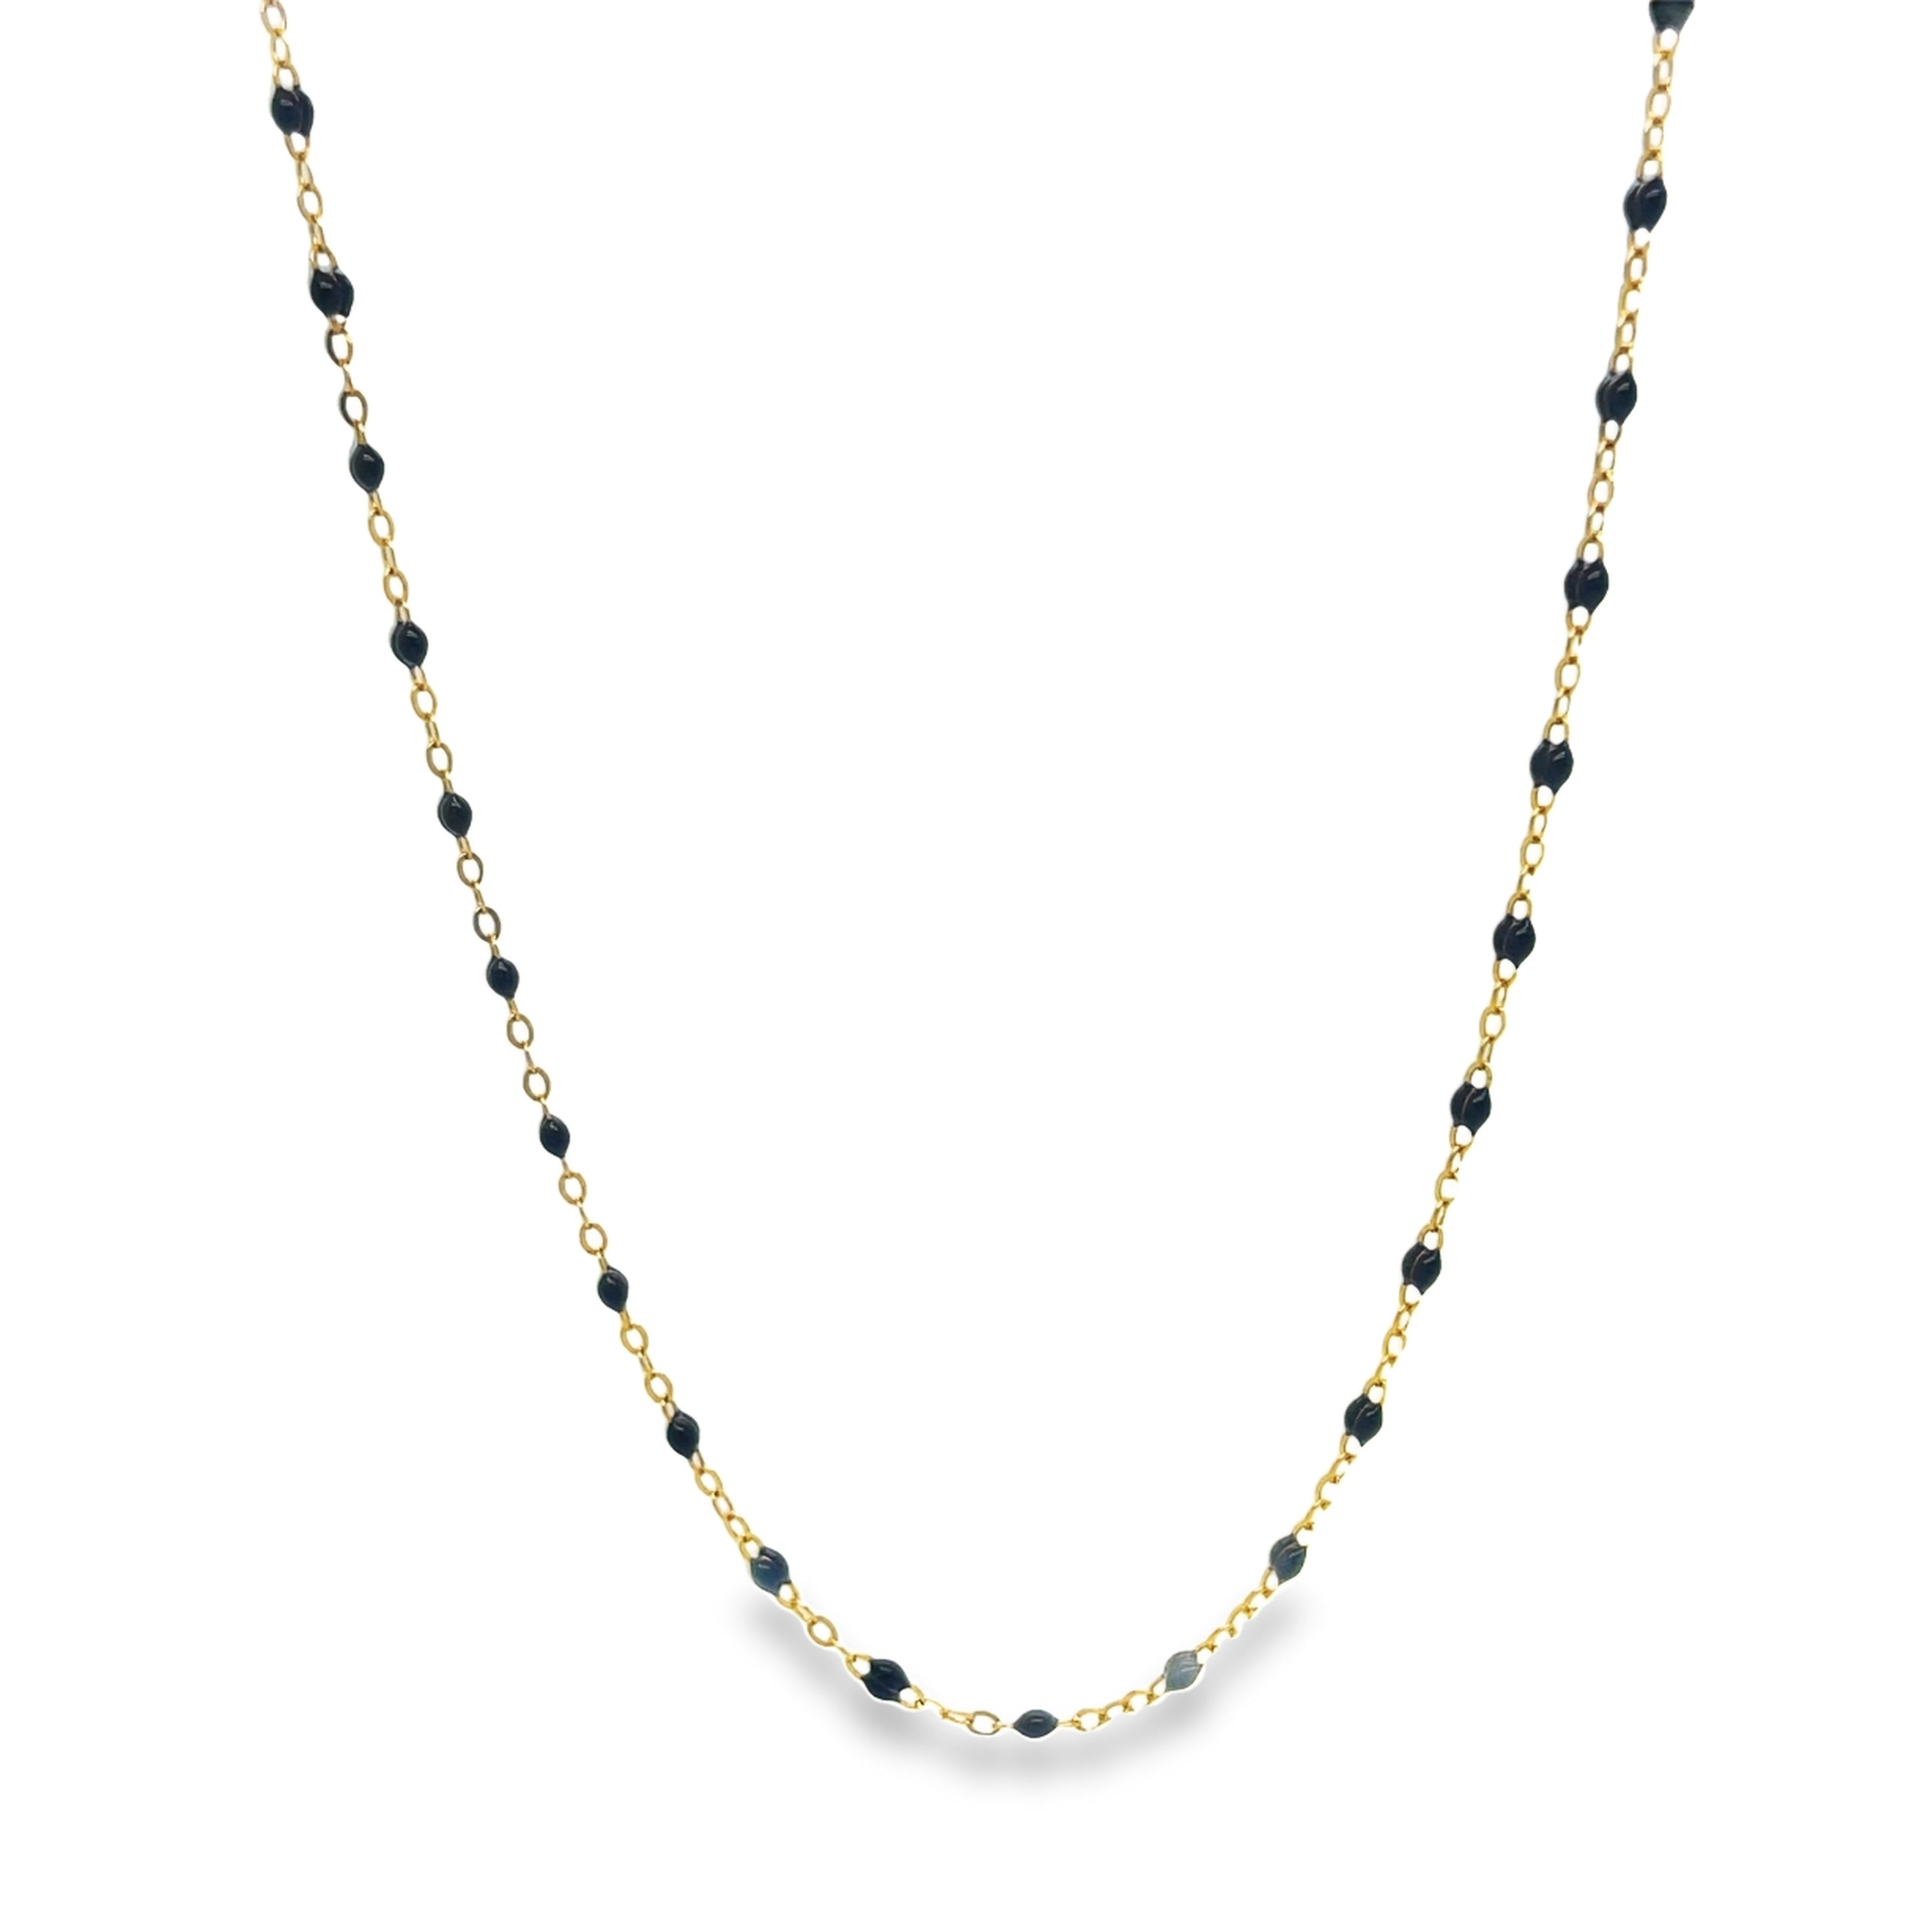 Expertly crafted with 18k yellow gold, this necklace boasts a sleek 20" length and features delicate, small enamel beads in a sophisticated gray hue. The addition of a convenient sizing loop ensures a perfect and comfortable fit. Enhance any outfit with this elegant and timeless piece of jewelry.